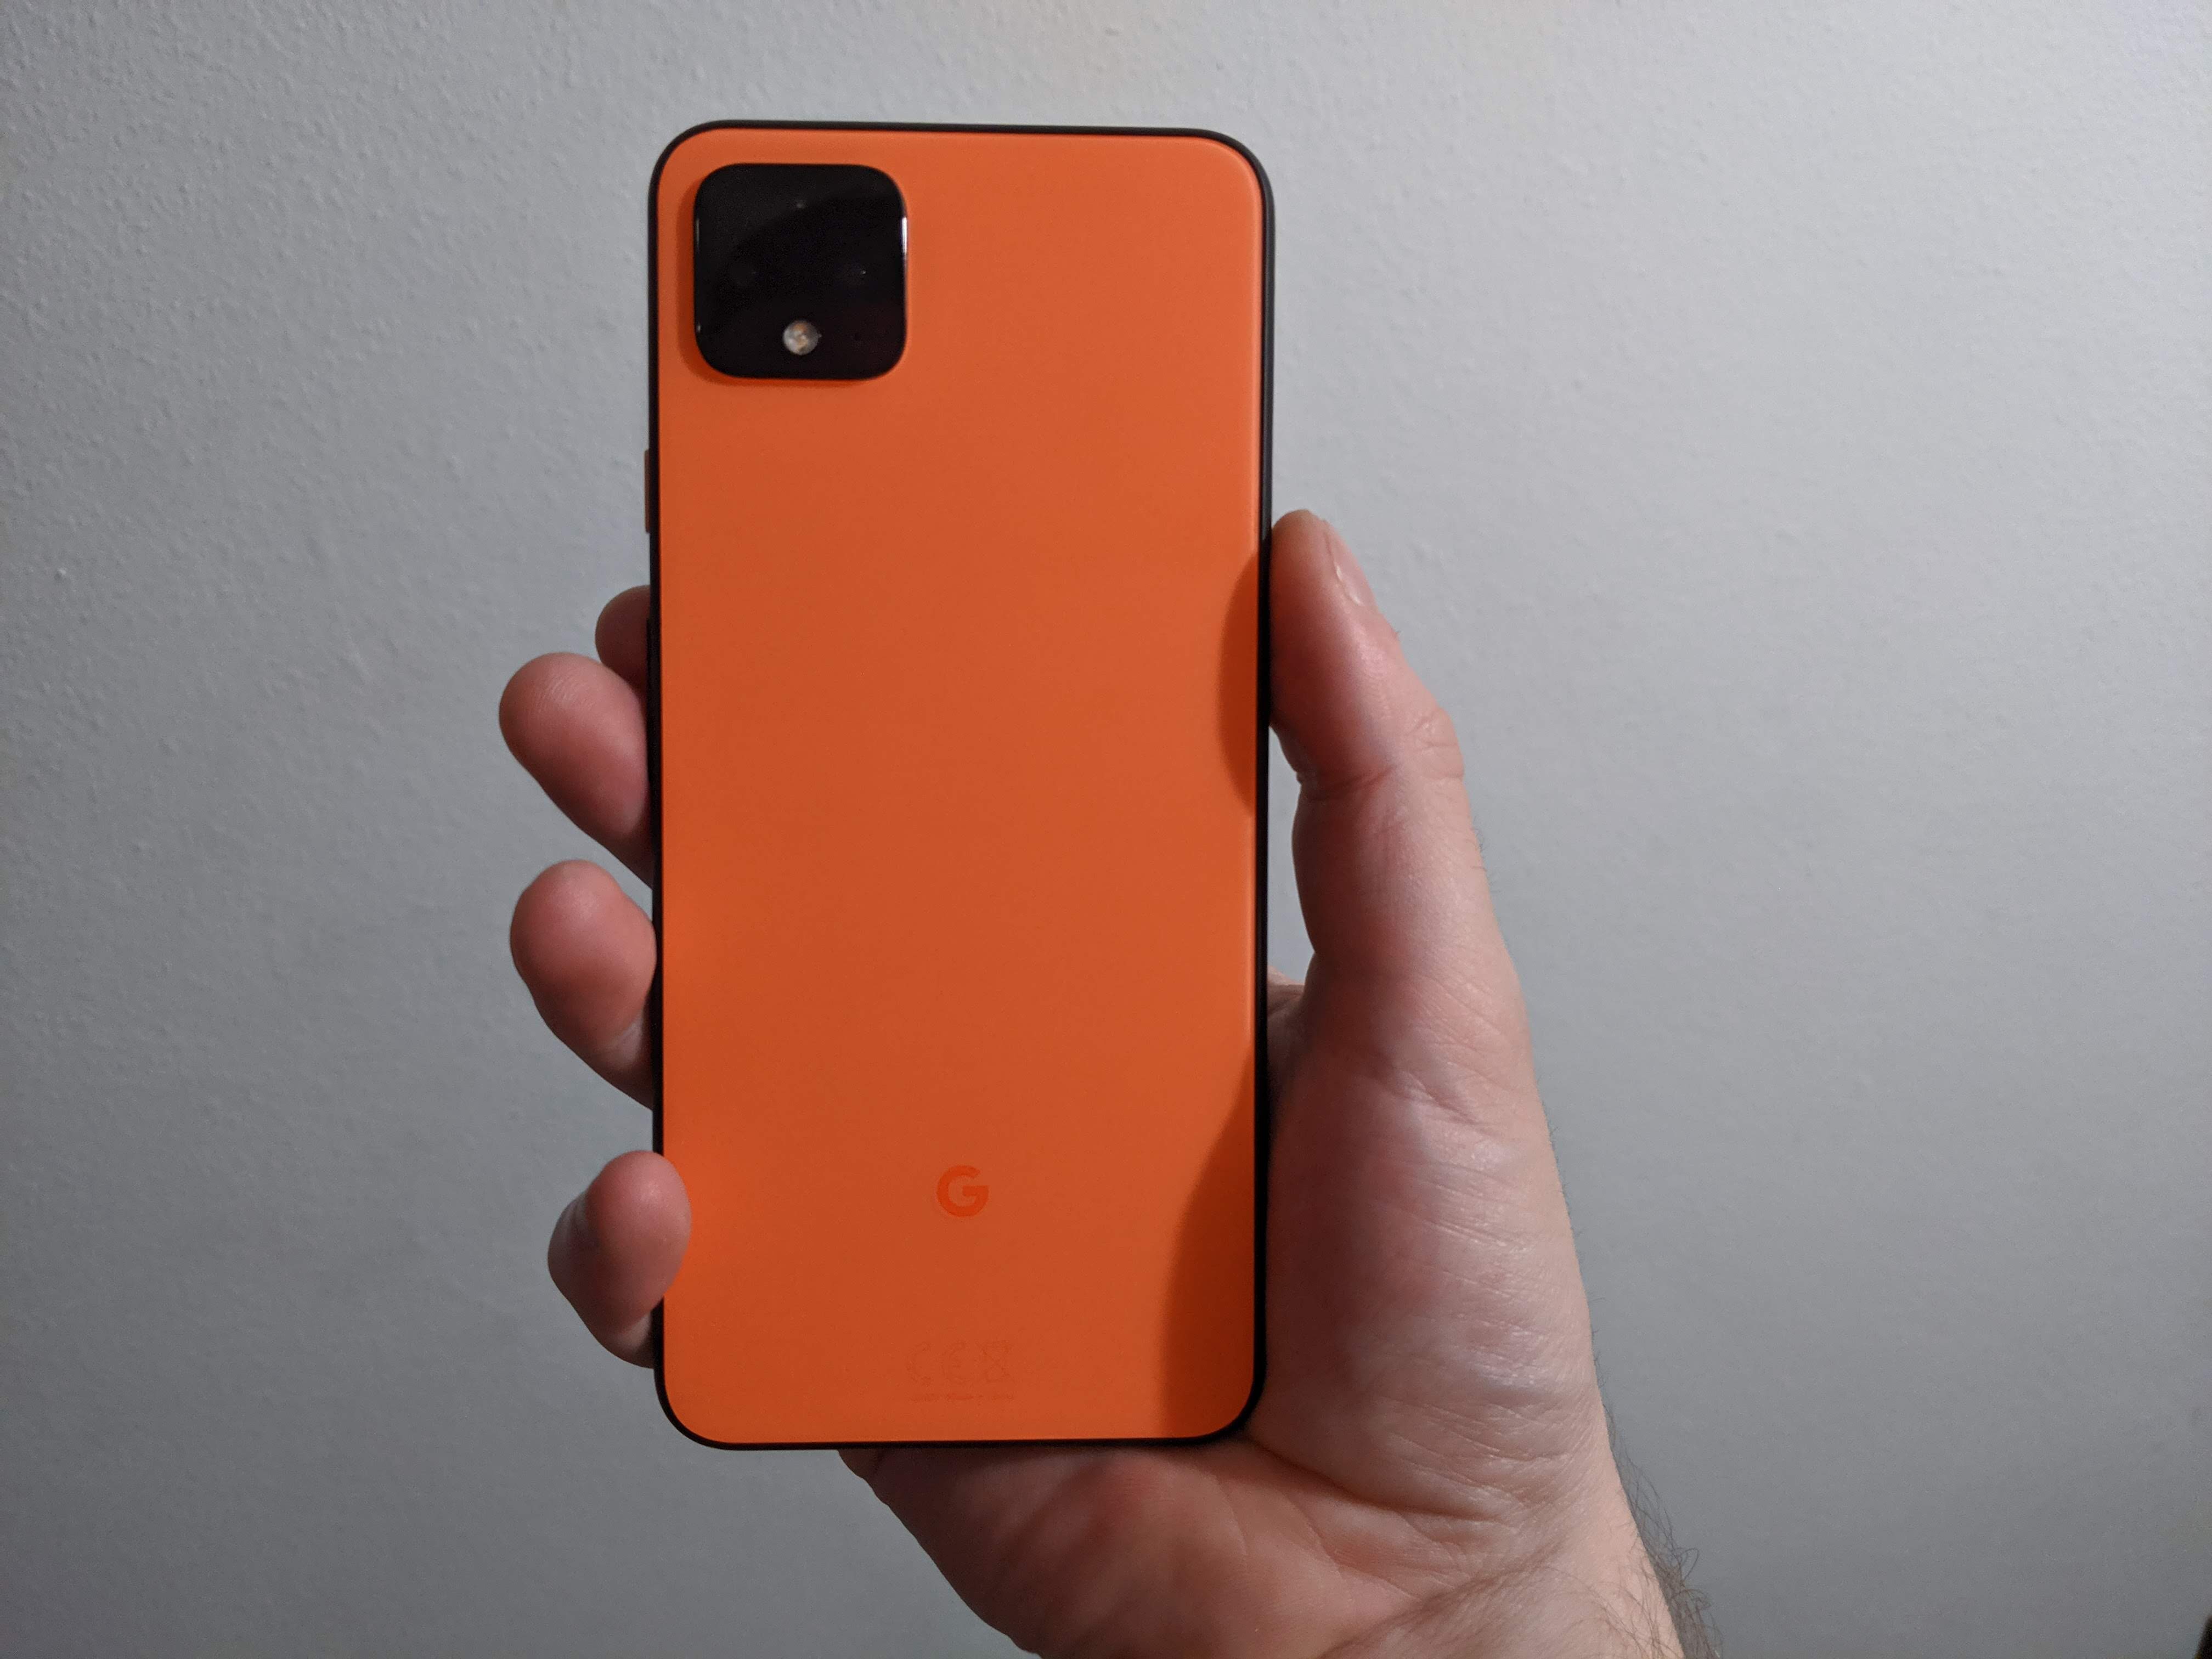 The Google Pixel 4 in the 'oh-so orange' colour